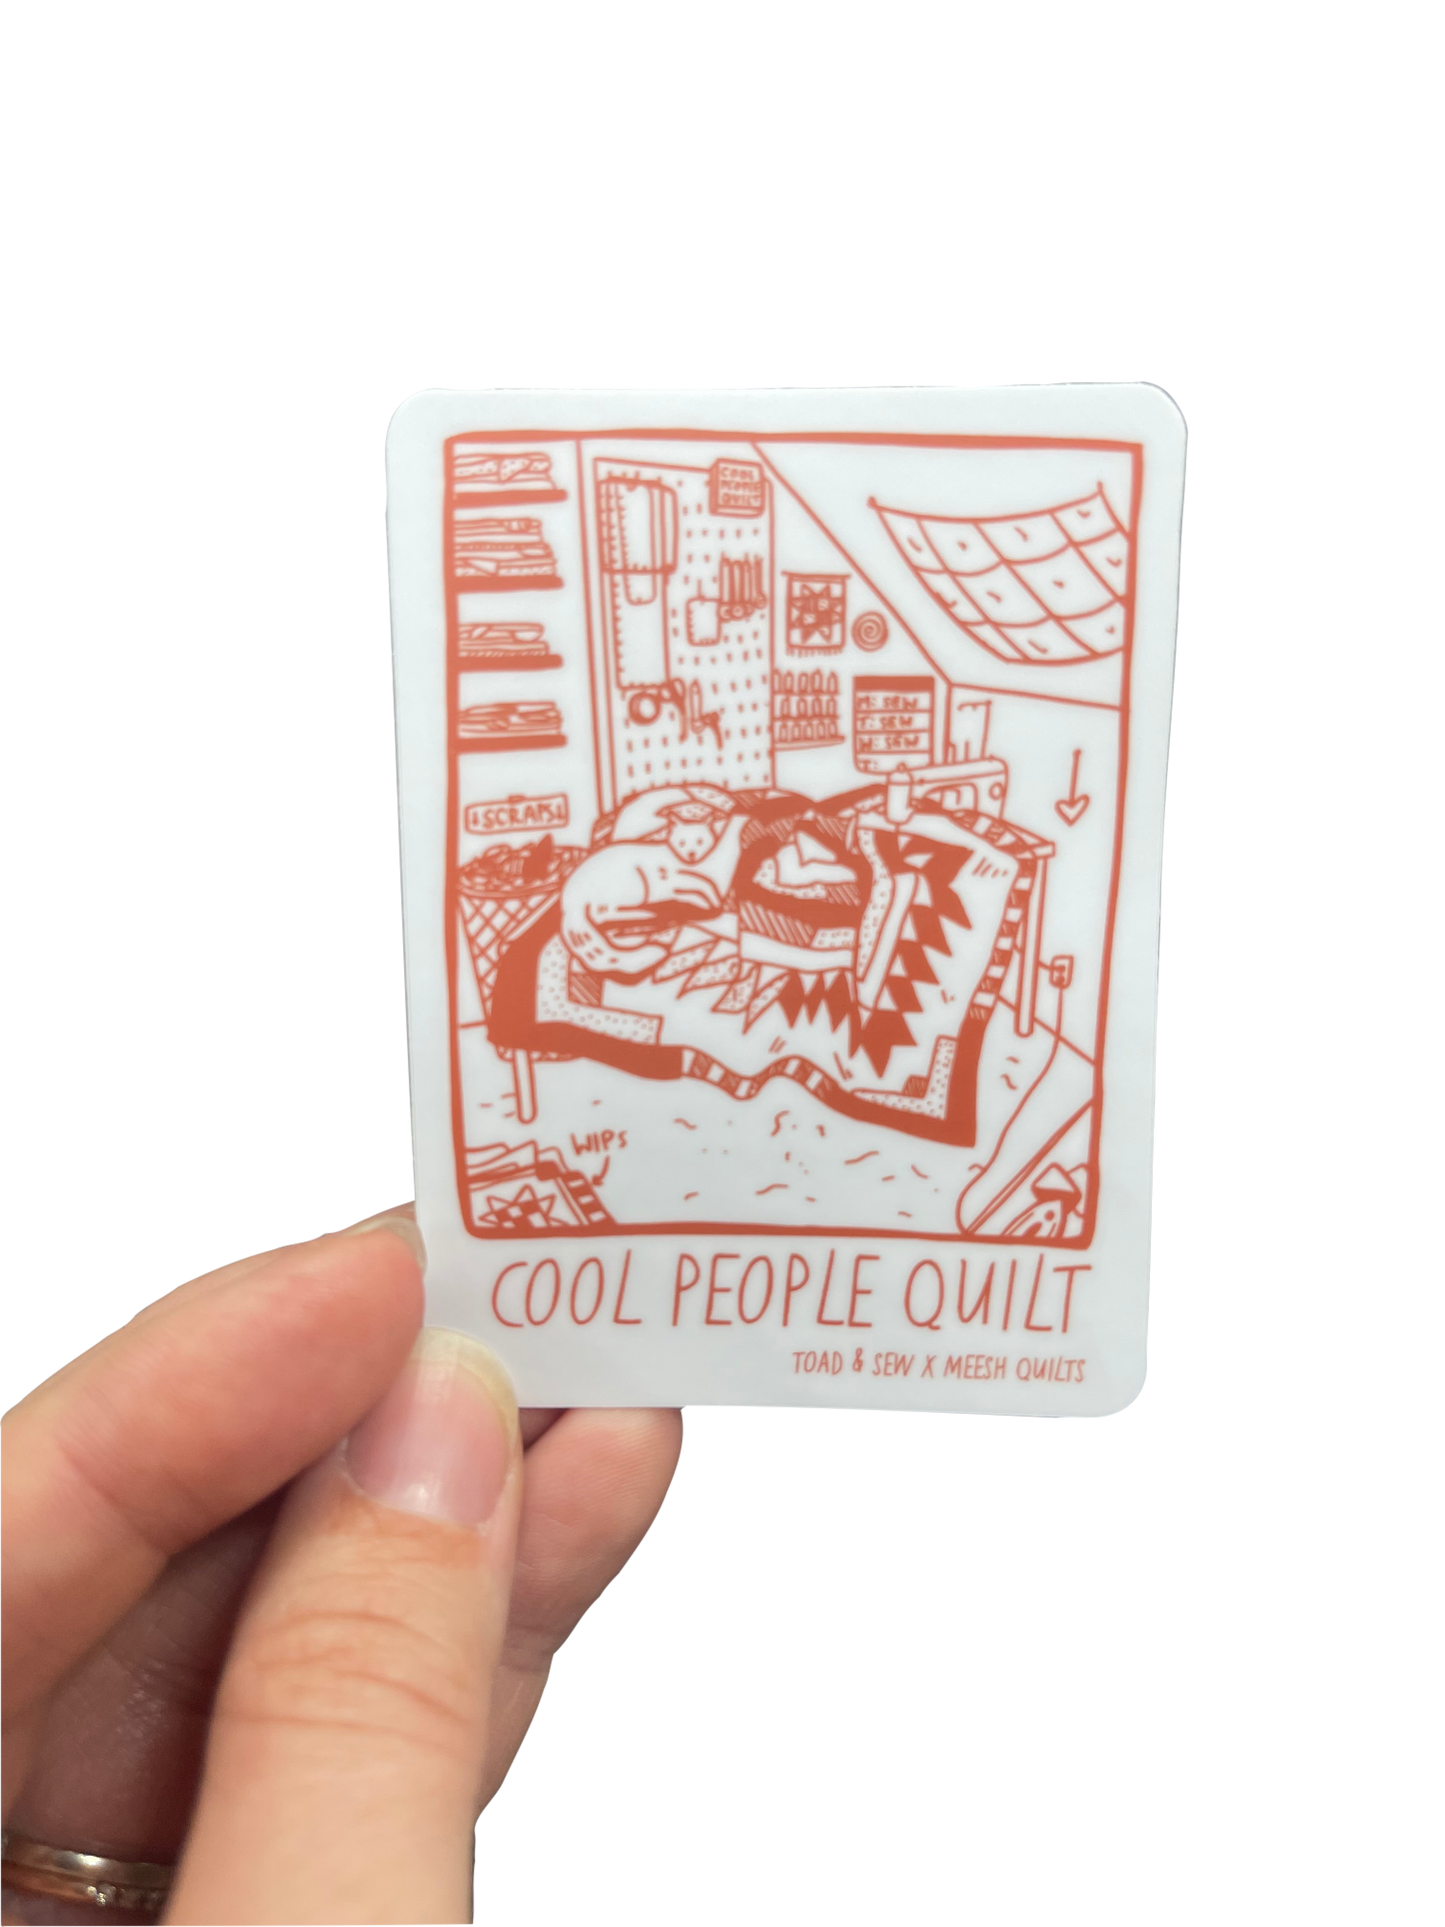 2021 Cool People Quilt Sticker